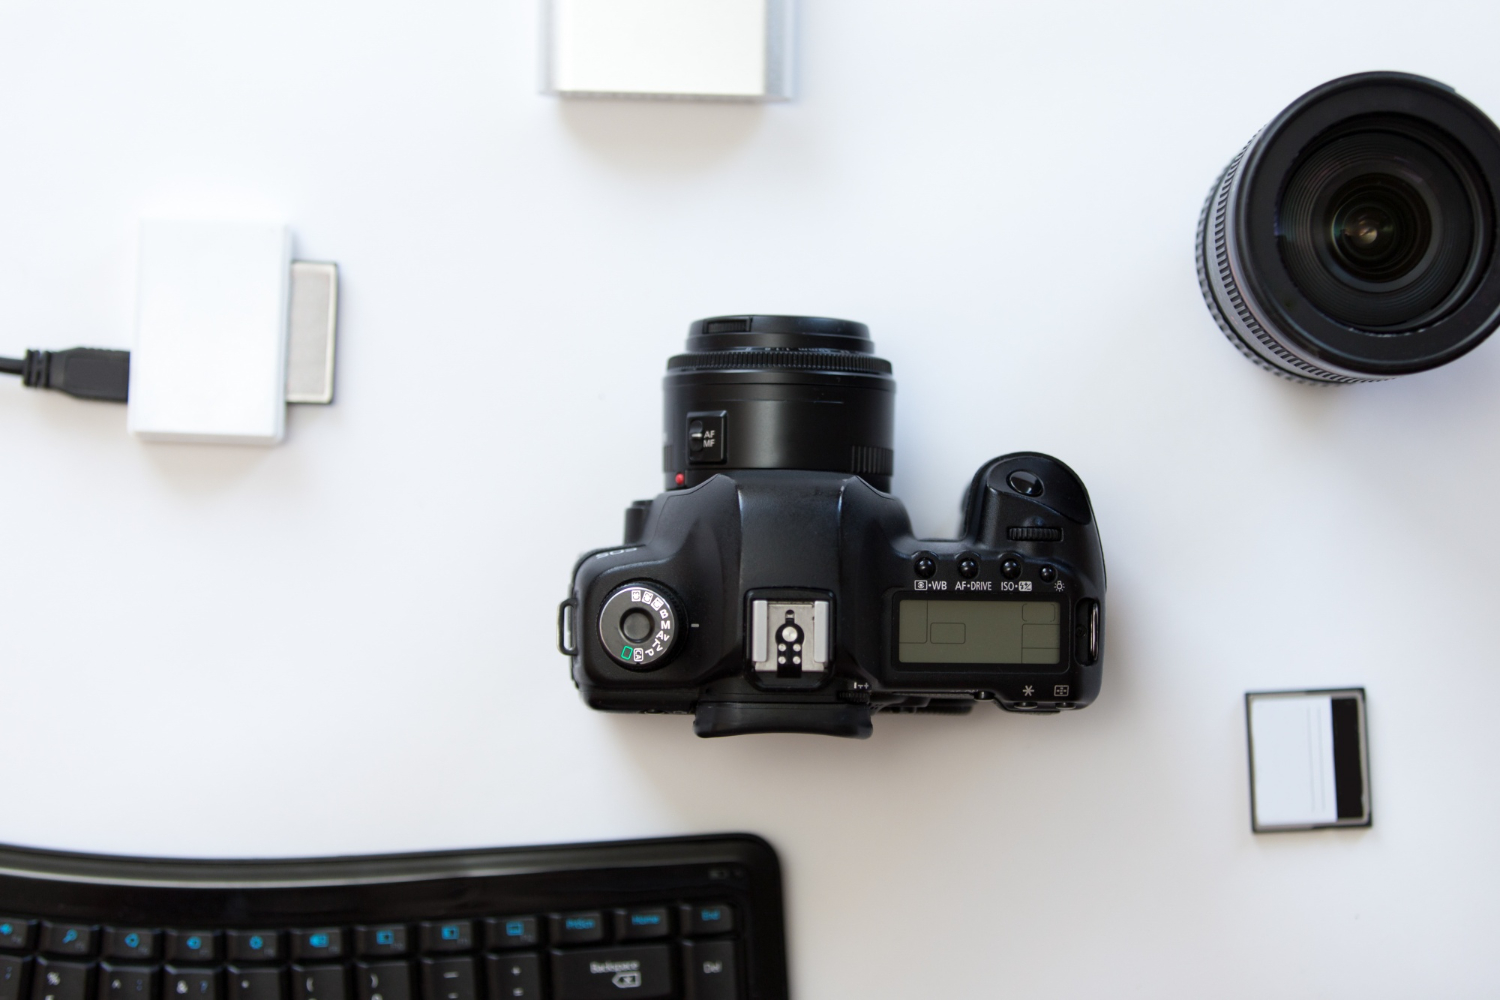 DSLR or mirrorless – which is worth choosing?